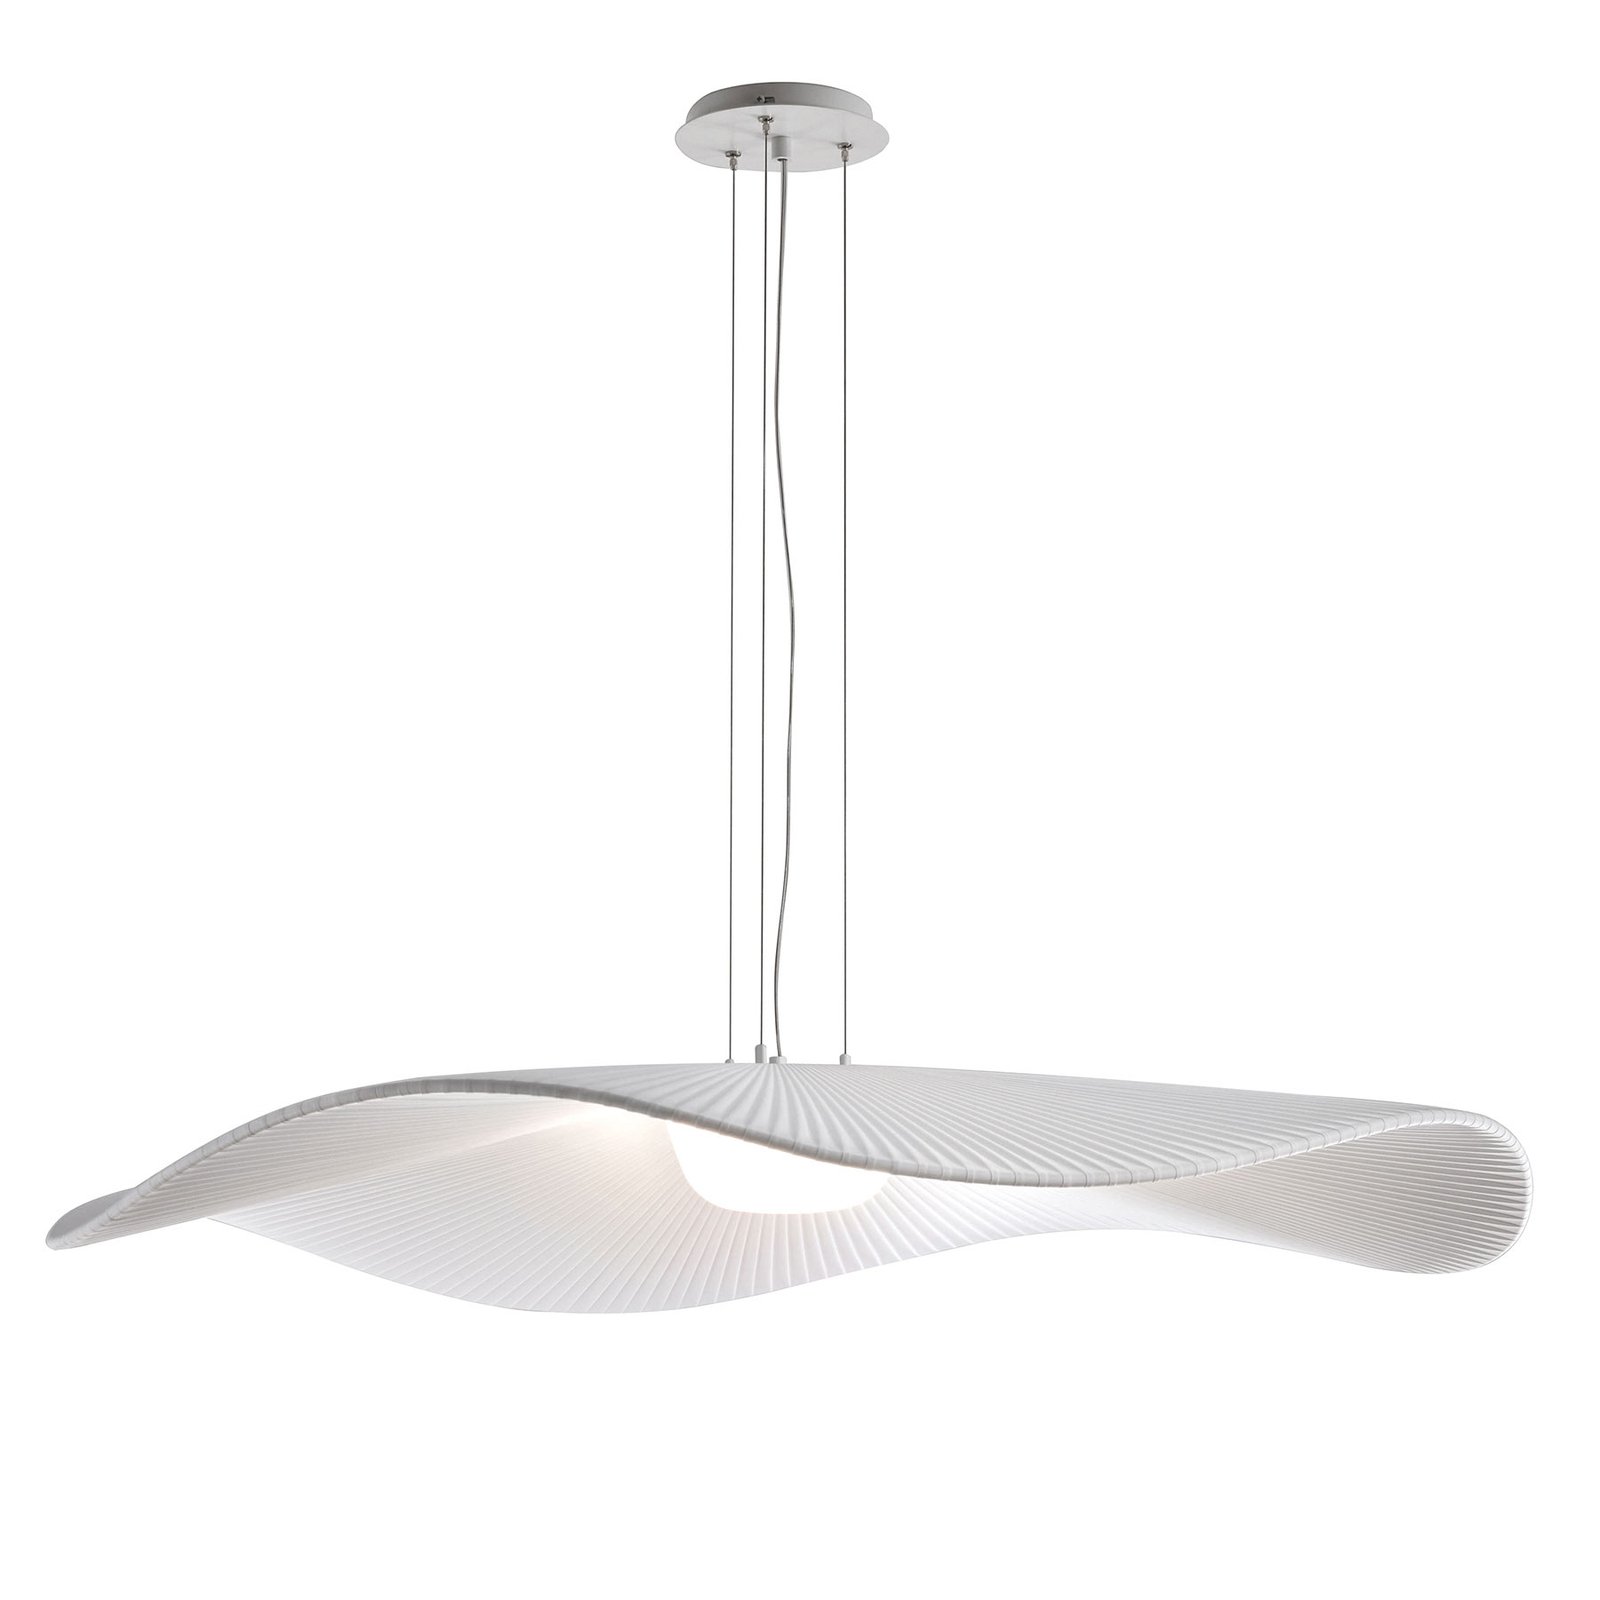 Bover Mediterrània LED hanging lamp white dimmable